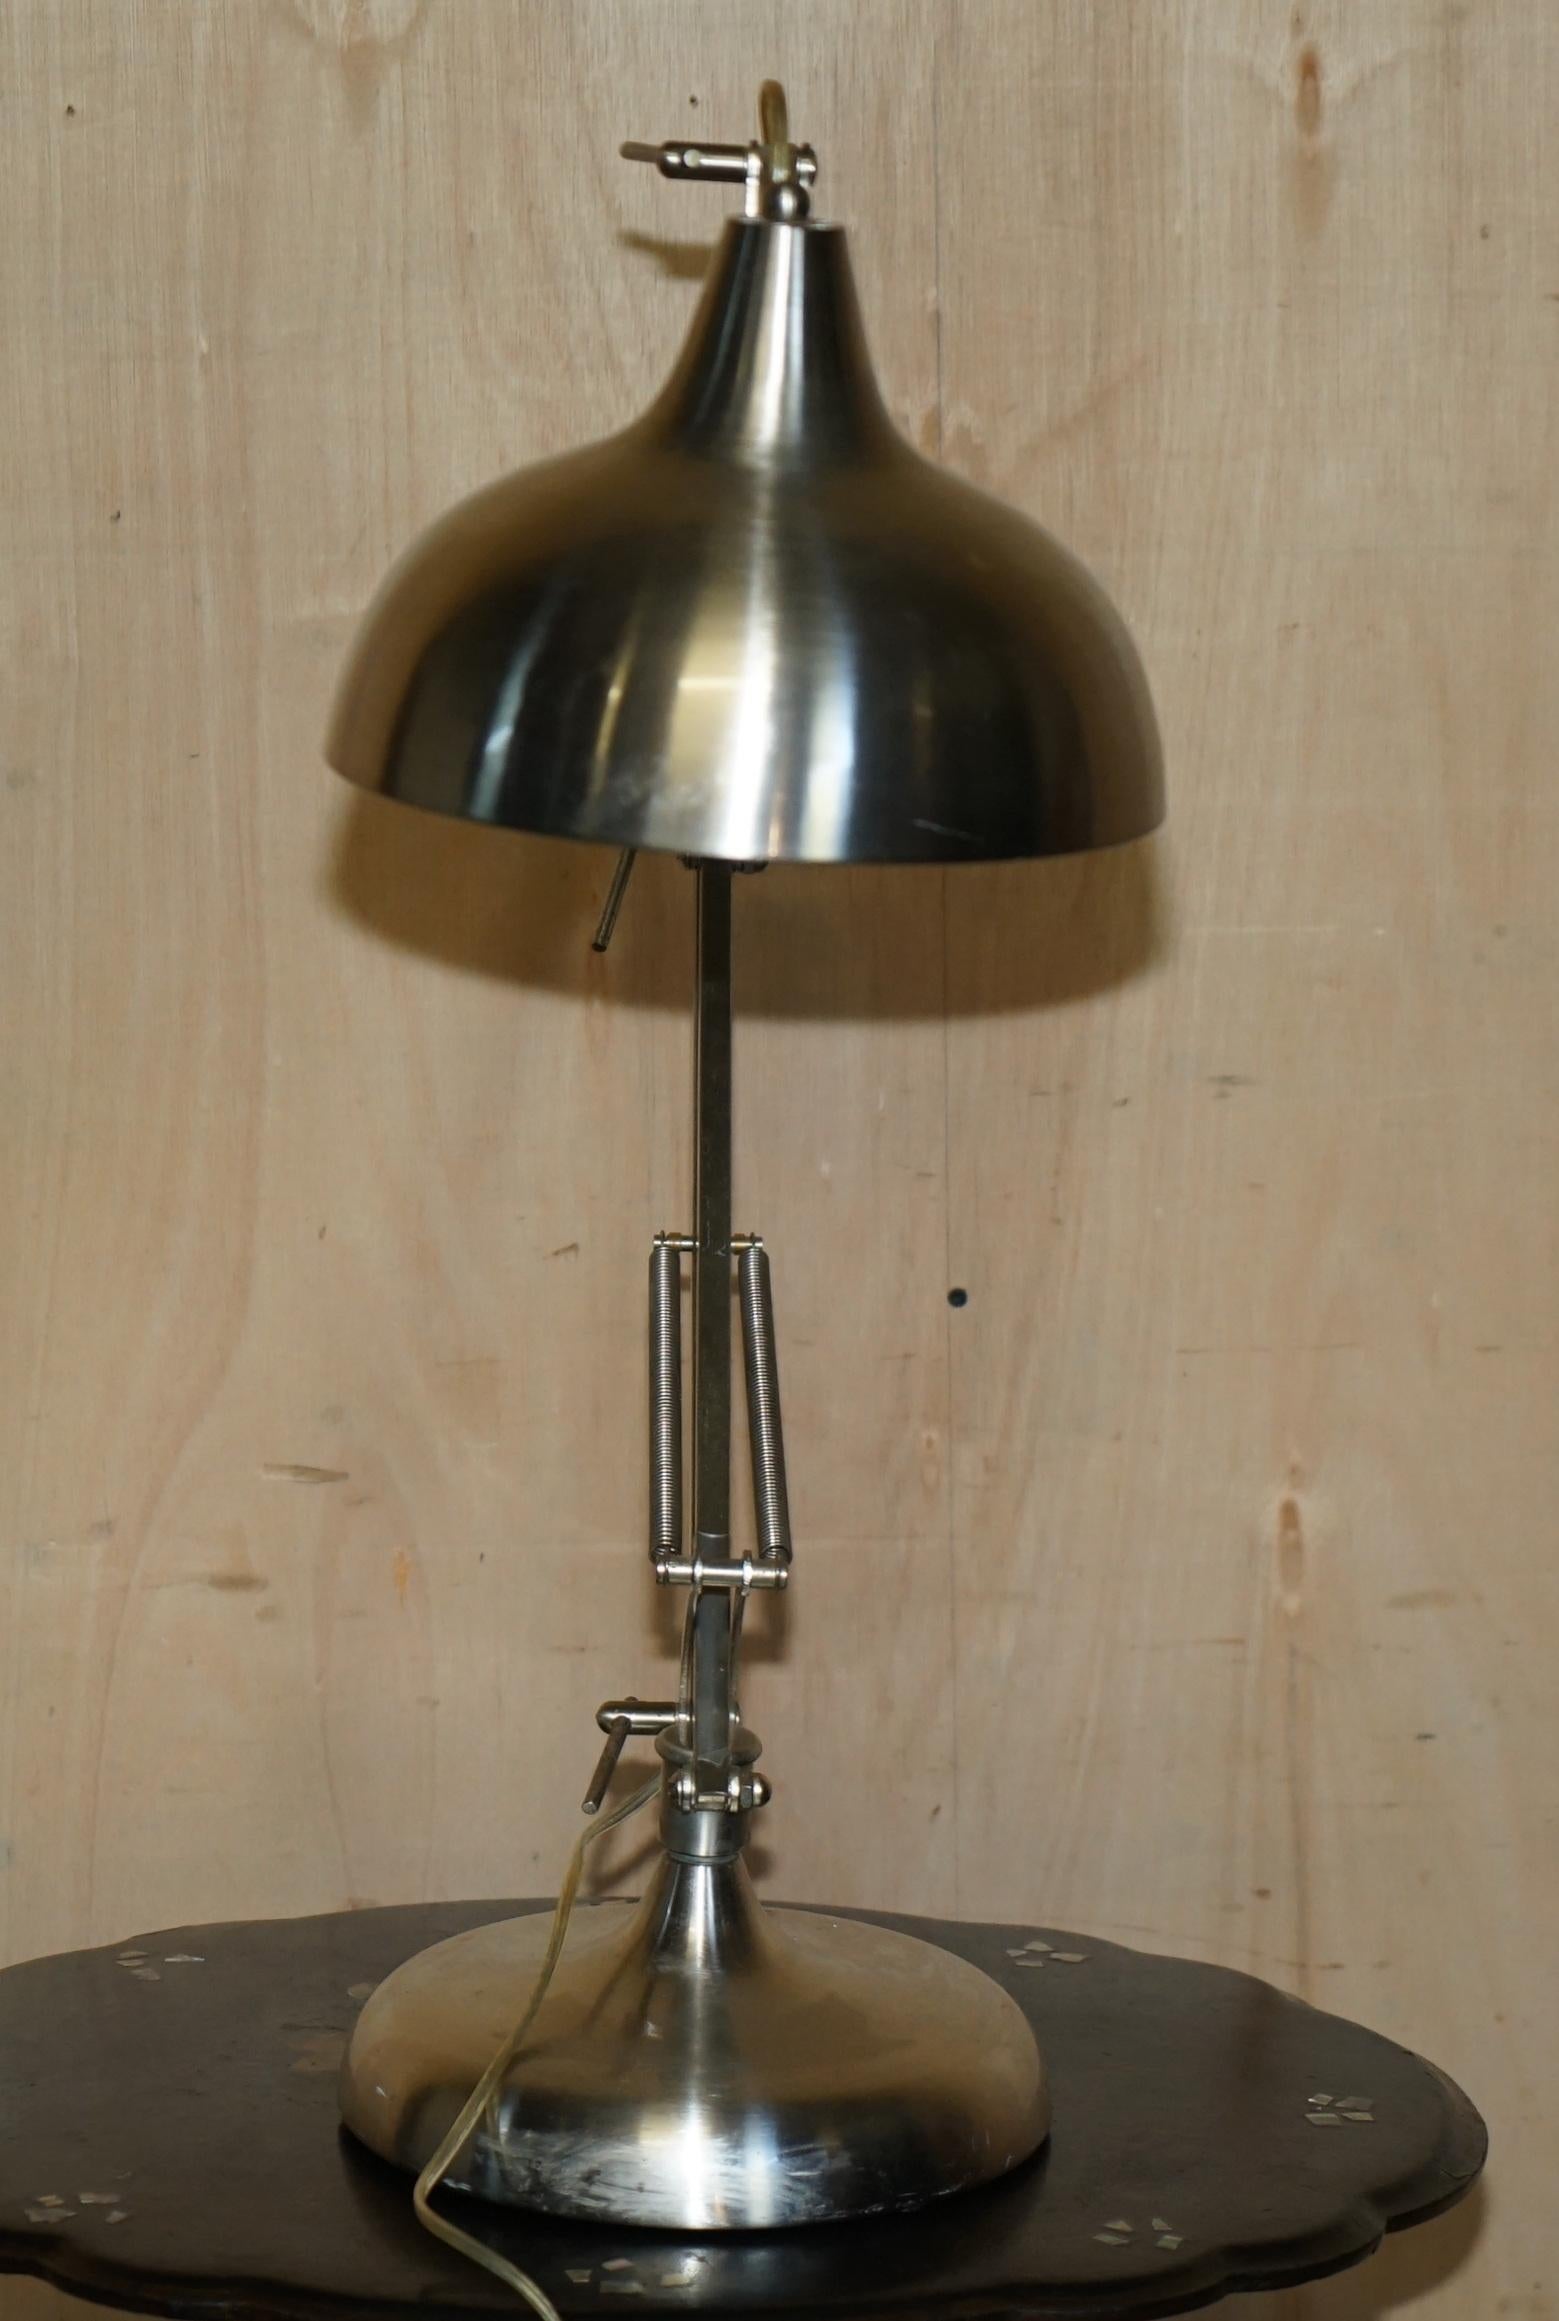 EXTRA LARGE MiD CENTURY MODERN ANGLEPOISE ARTICULATED TABLE LAMP FROM NICE For Sale 1